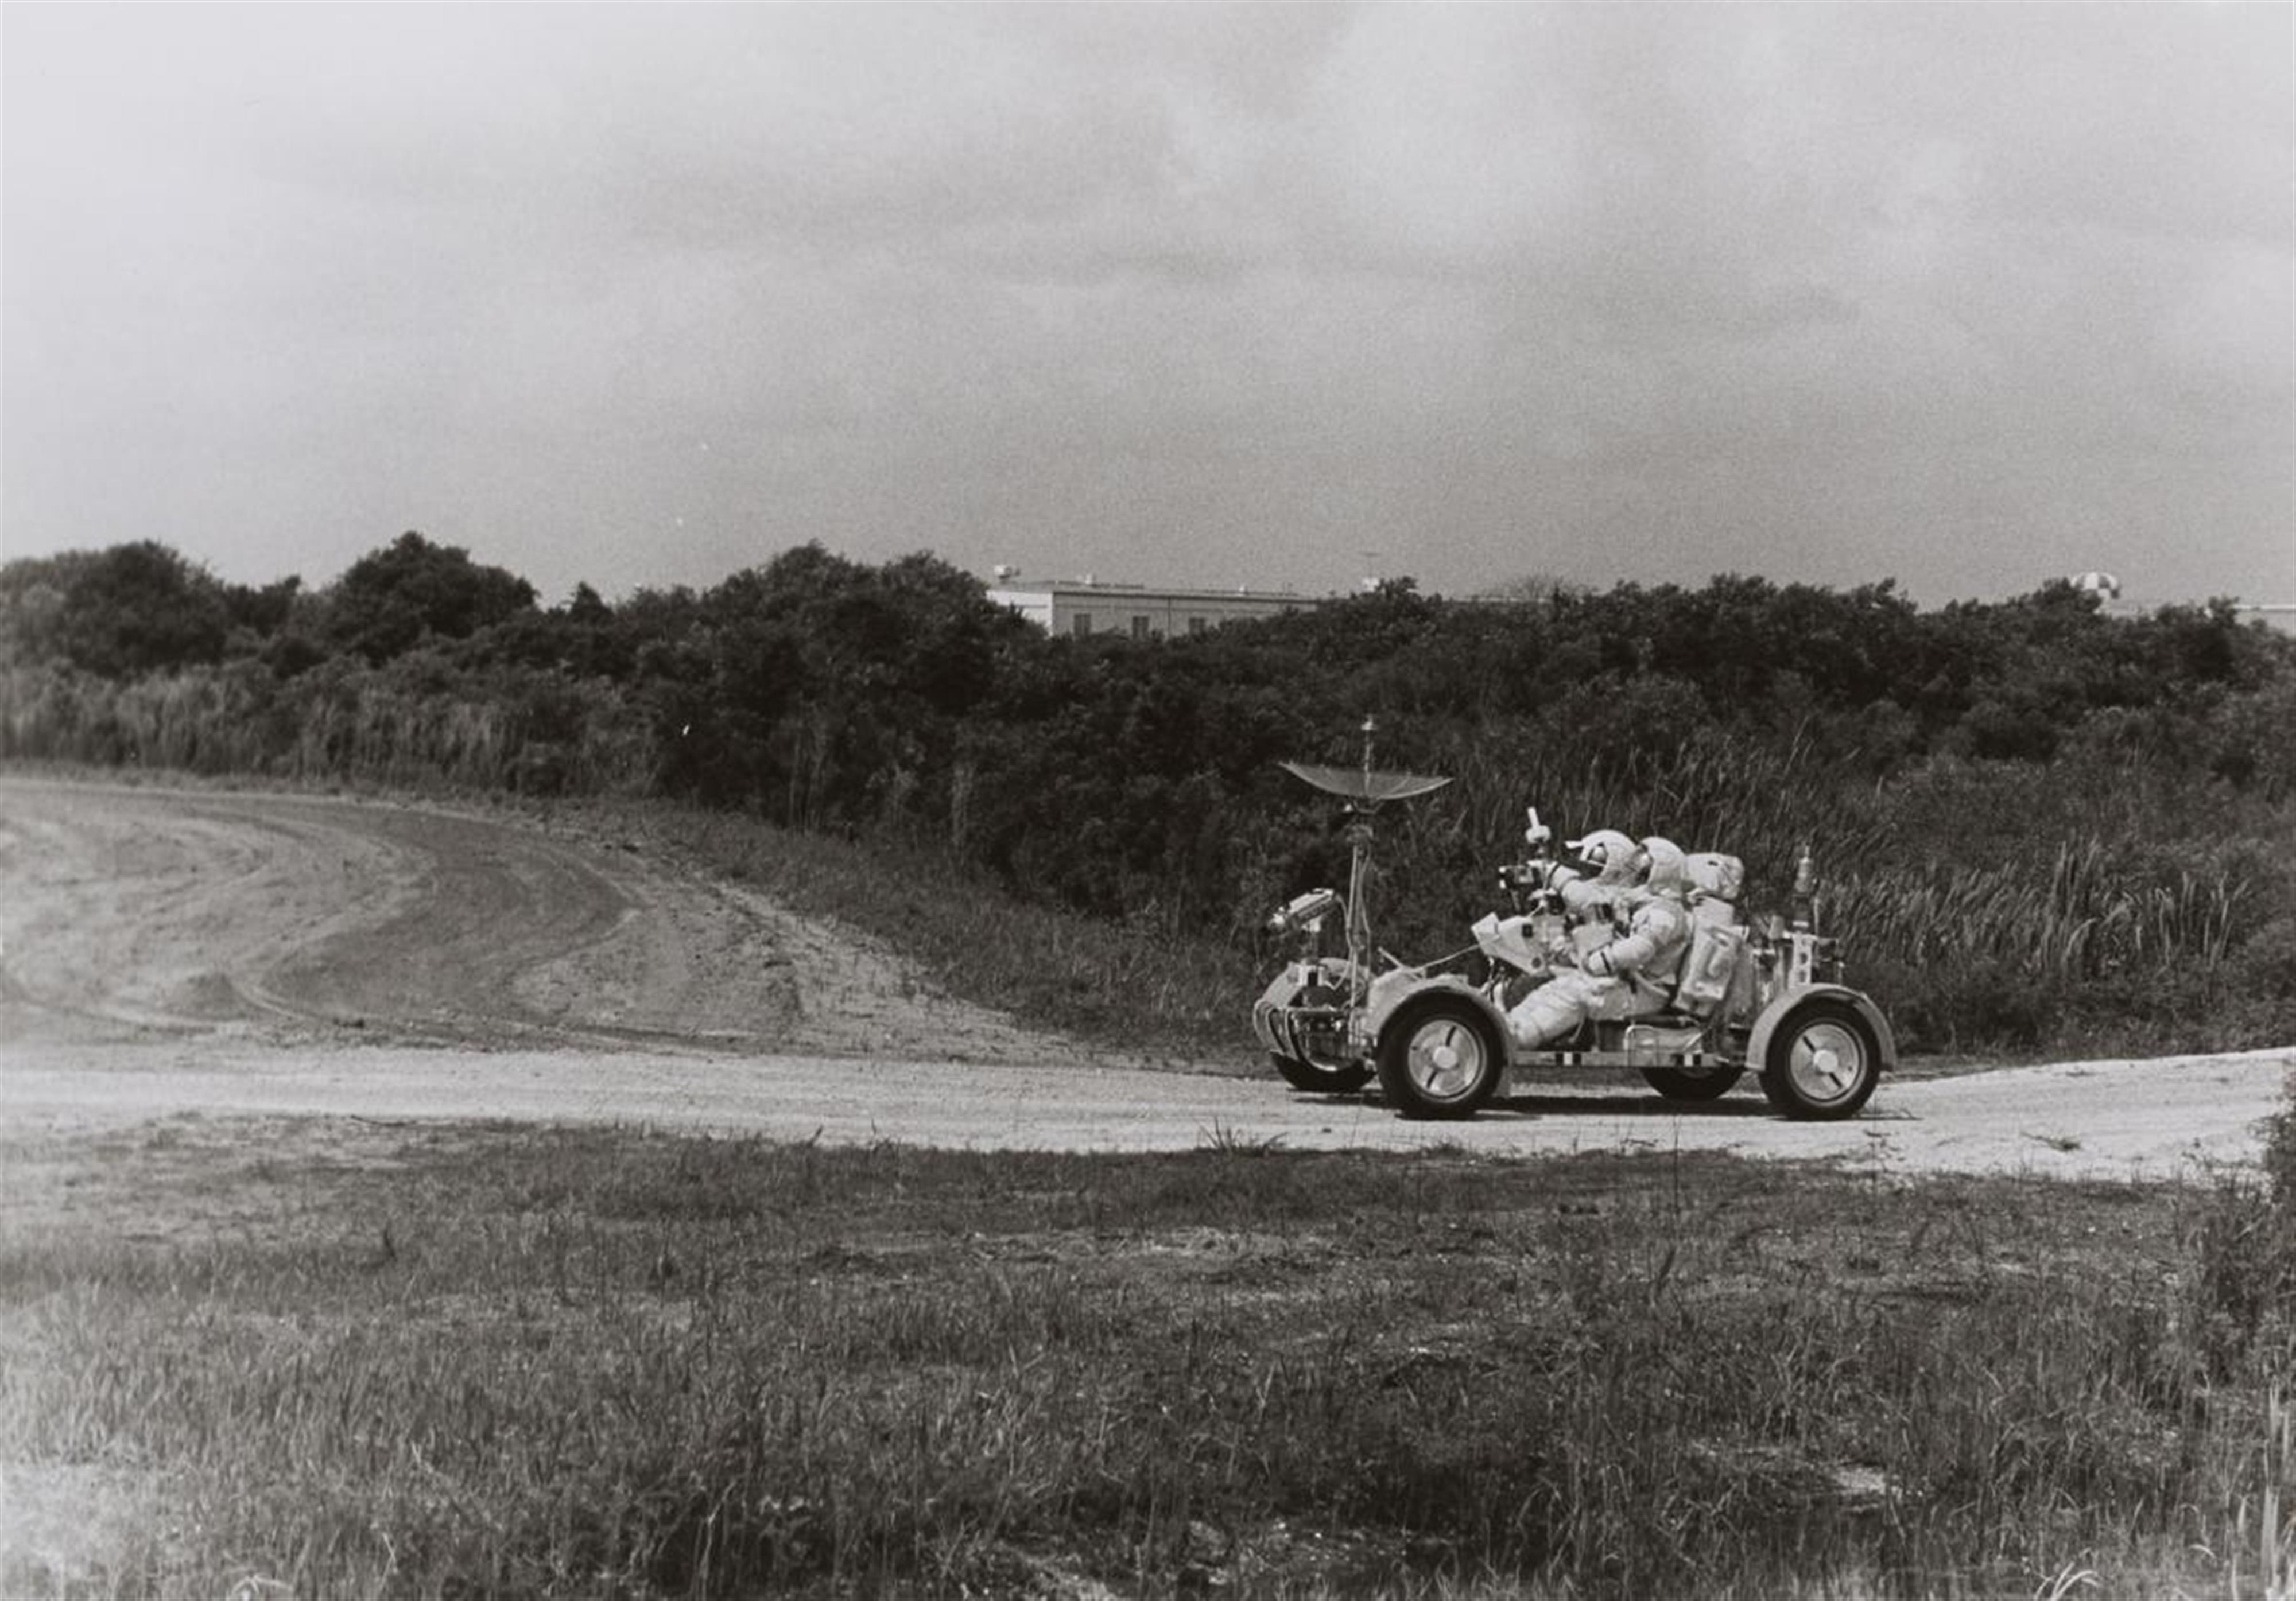 NASA - Apollo 15 backup astronauts Gordon Jr. and Schmitt drive a training model of the lunar roving vehicle, Kennedy Space Center - image-1